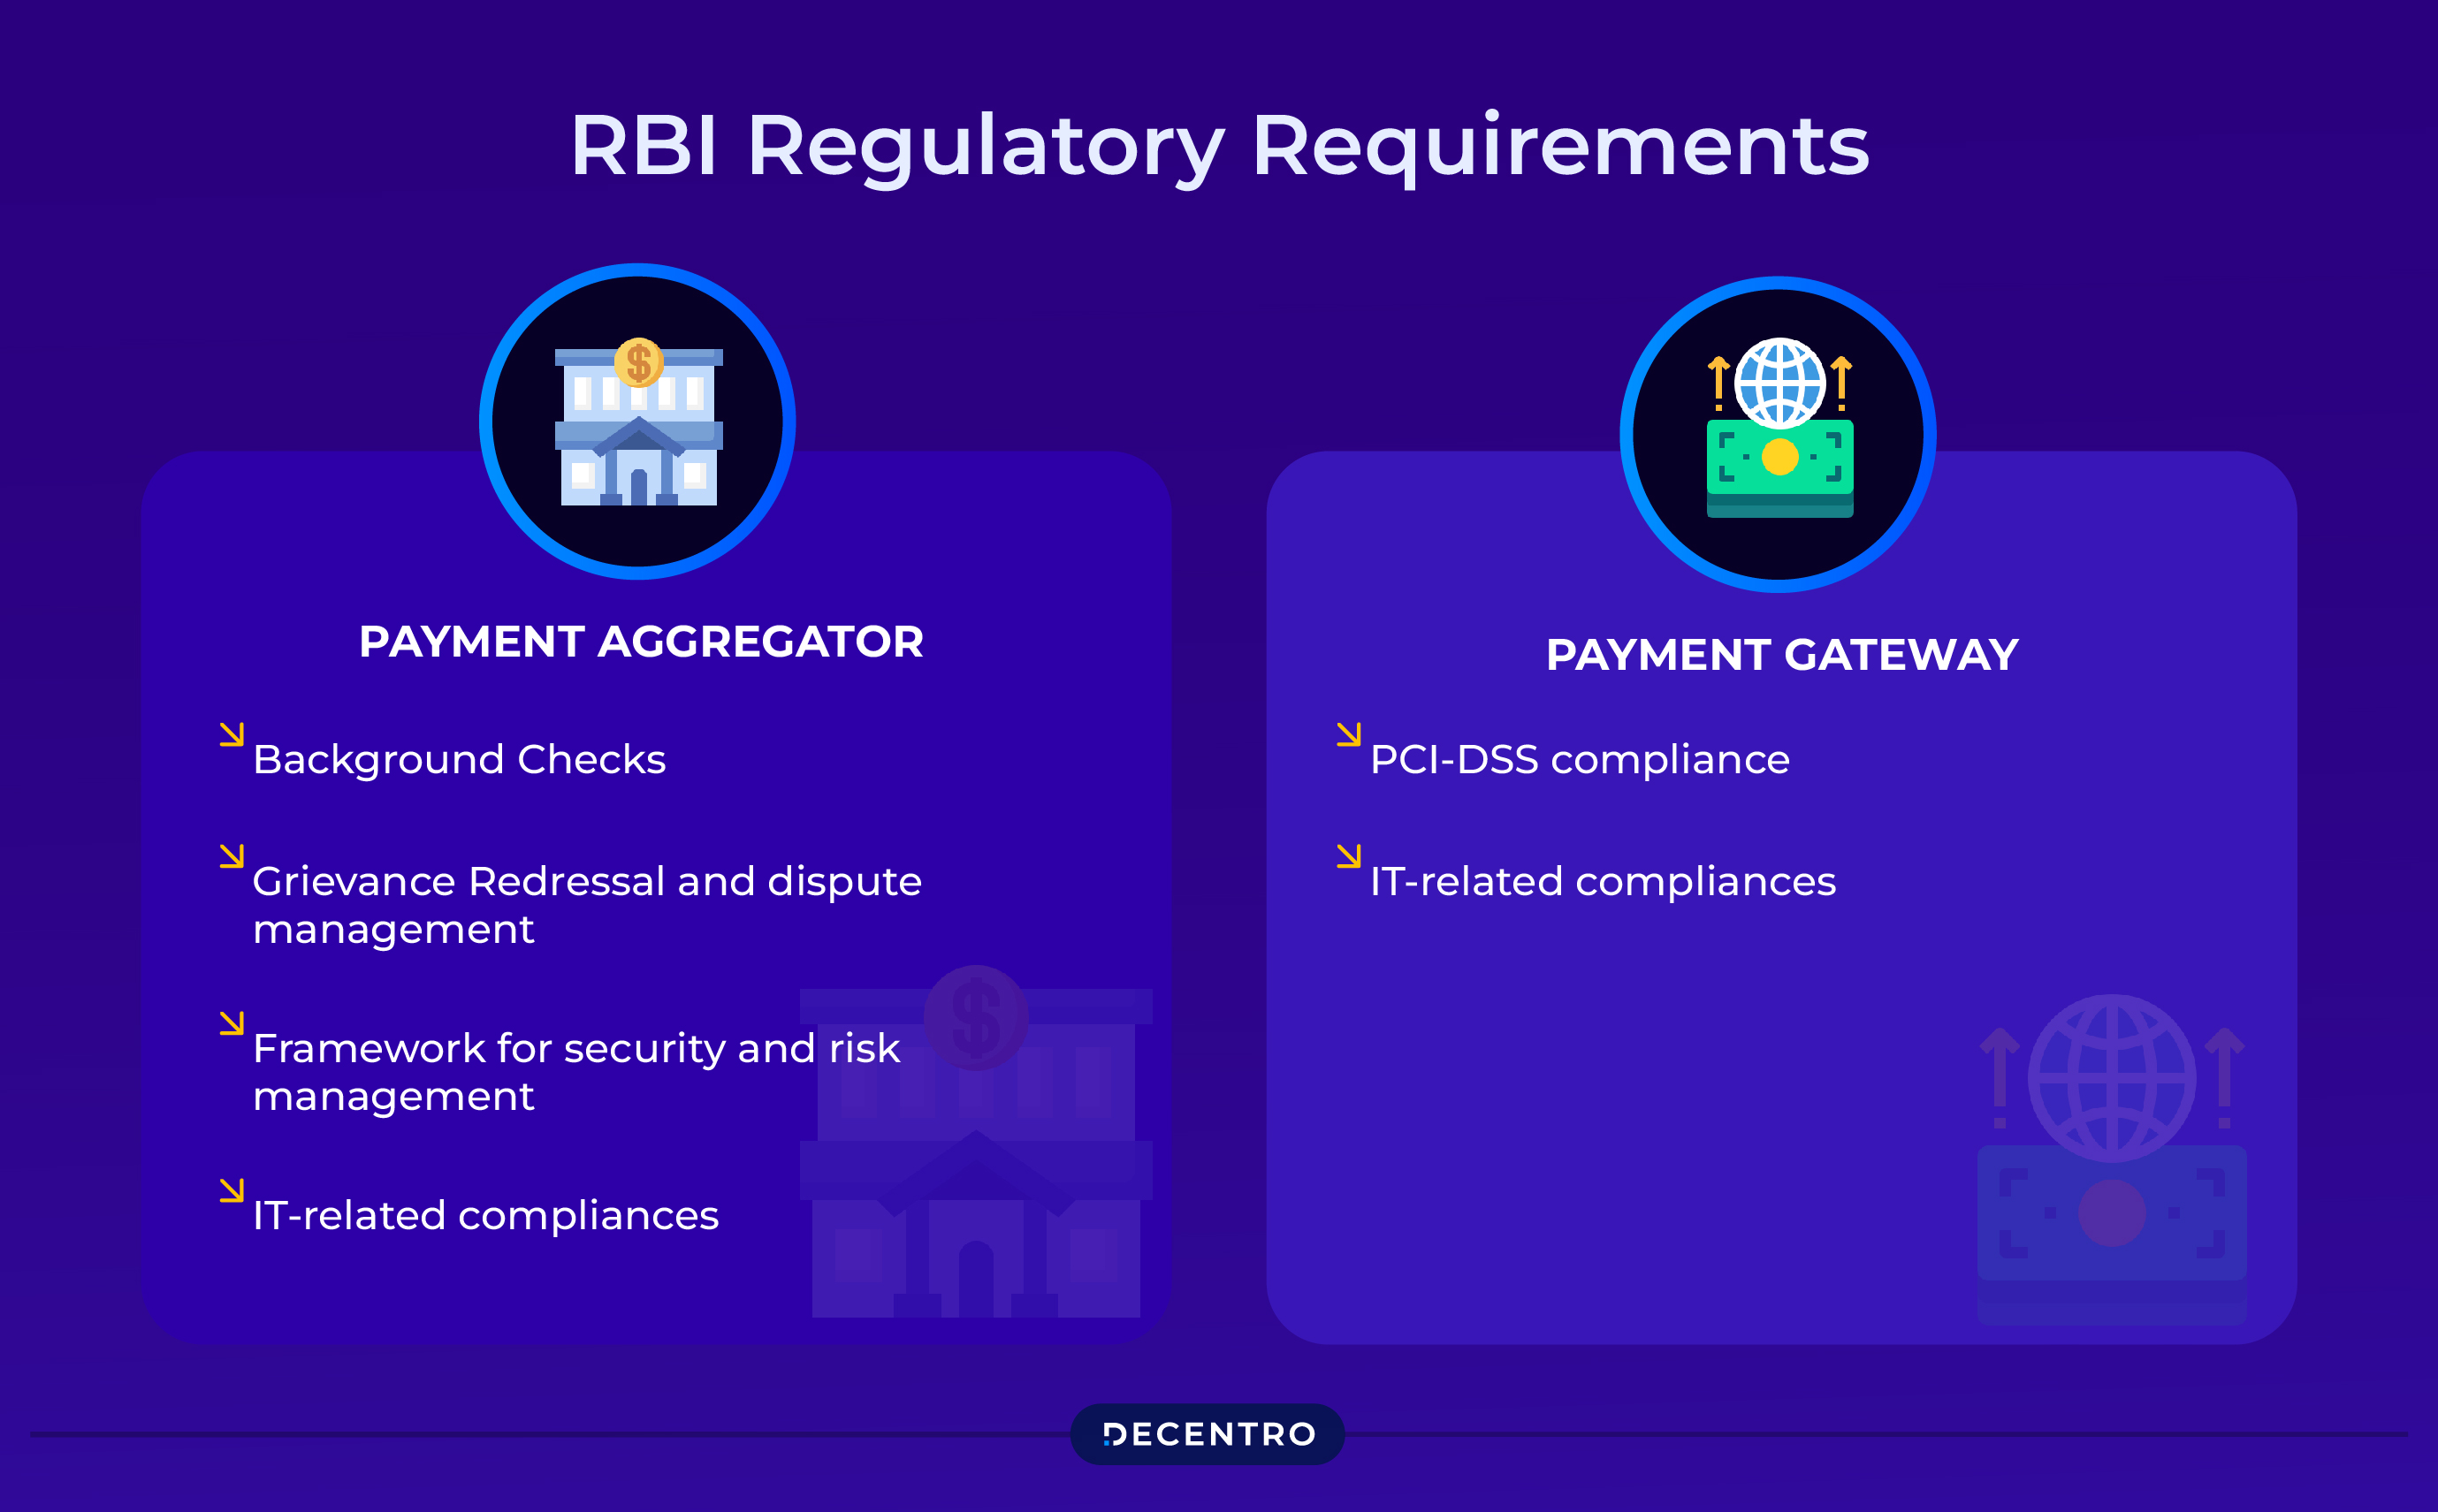 The Regulatory Requirements for PA vs PG